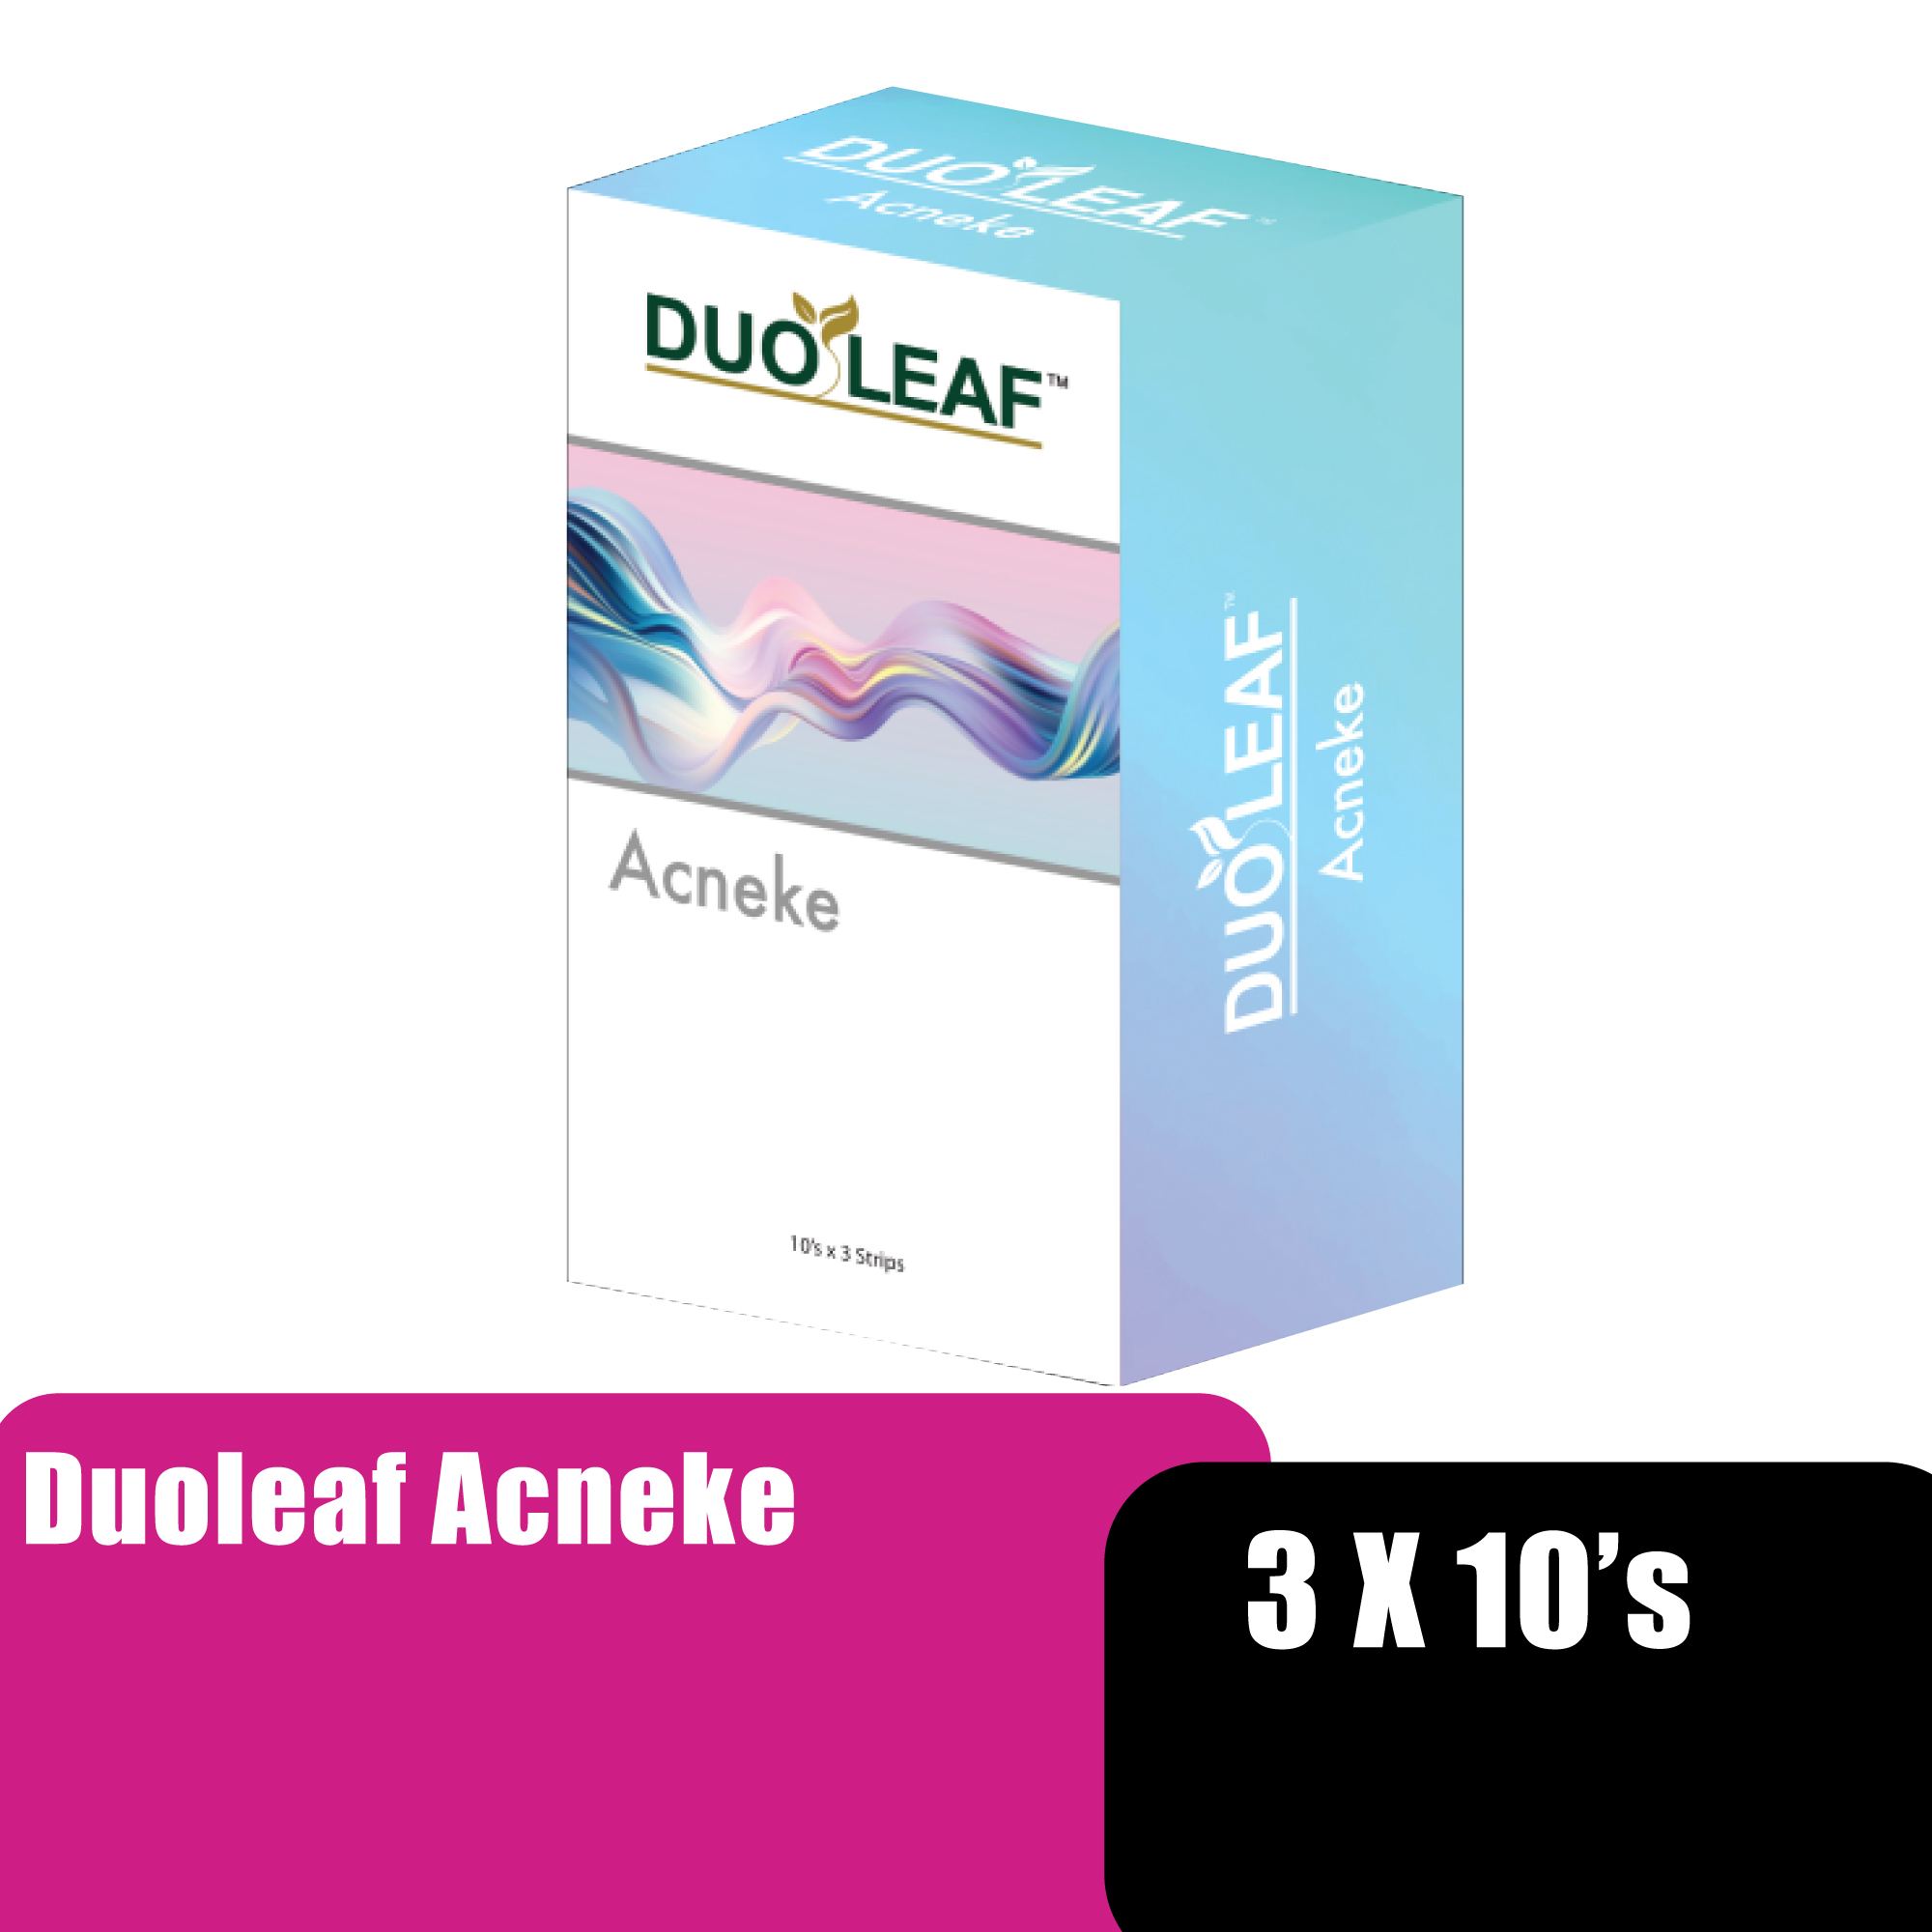 DUOLEAF Acneke Capsule 3 X 10'S Supplement with Lactoferrin from Cow Milk for Acne & Skin Healing 痘痘 保健品